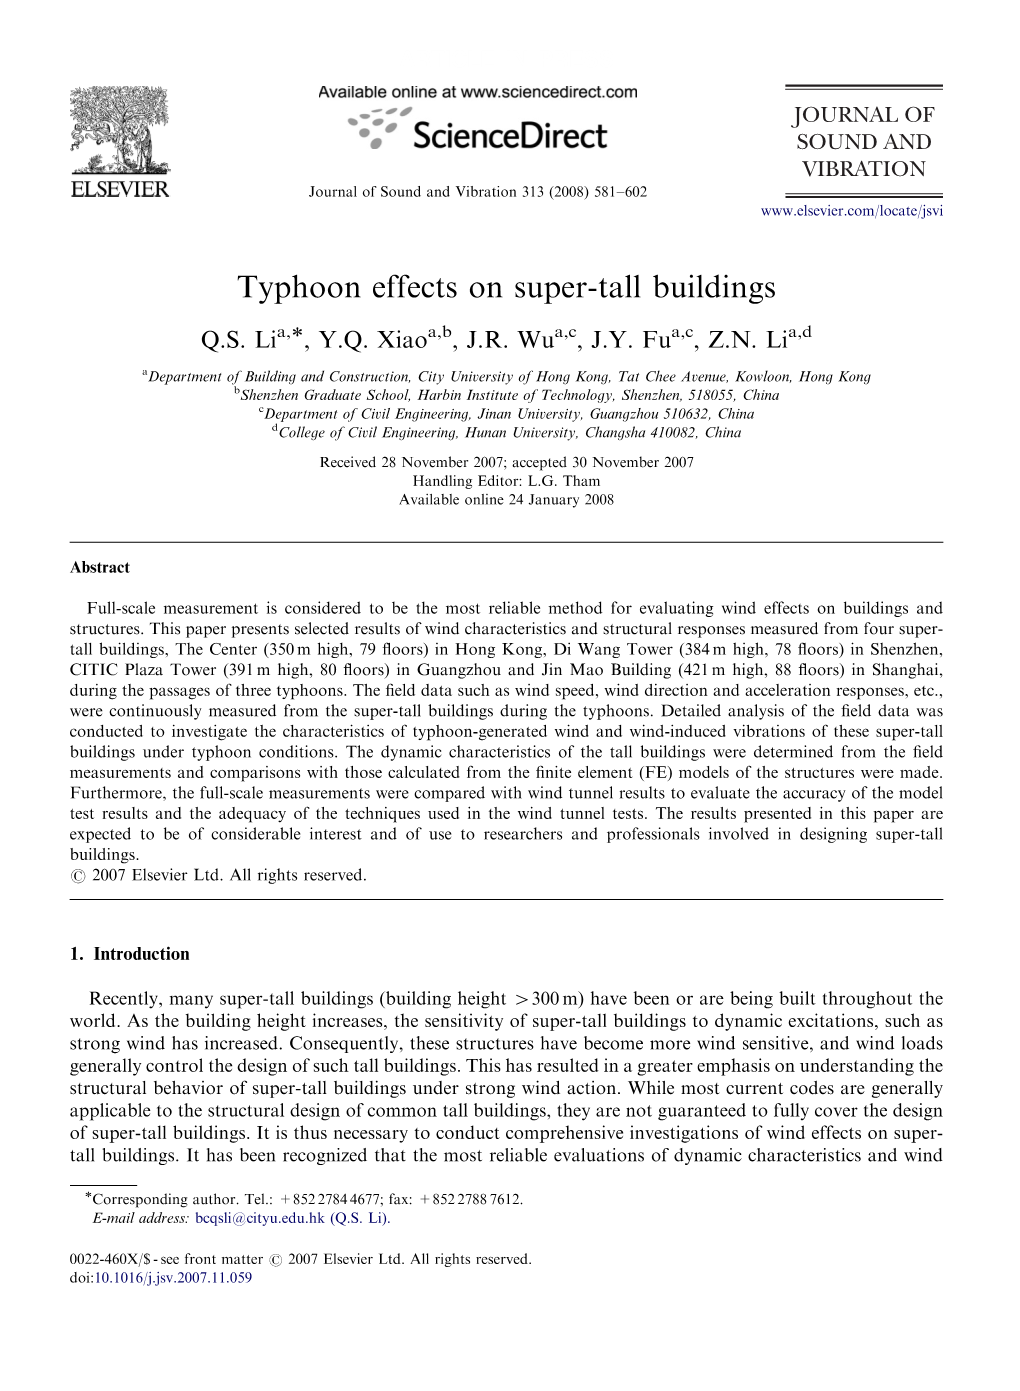 Typhoon Effects on Super-Tall Buildings